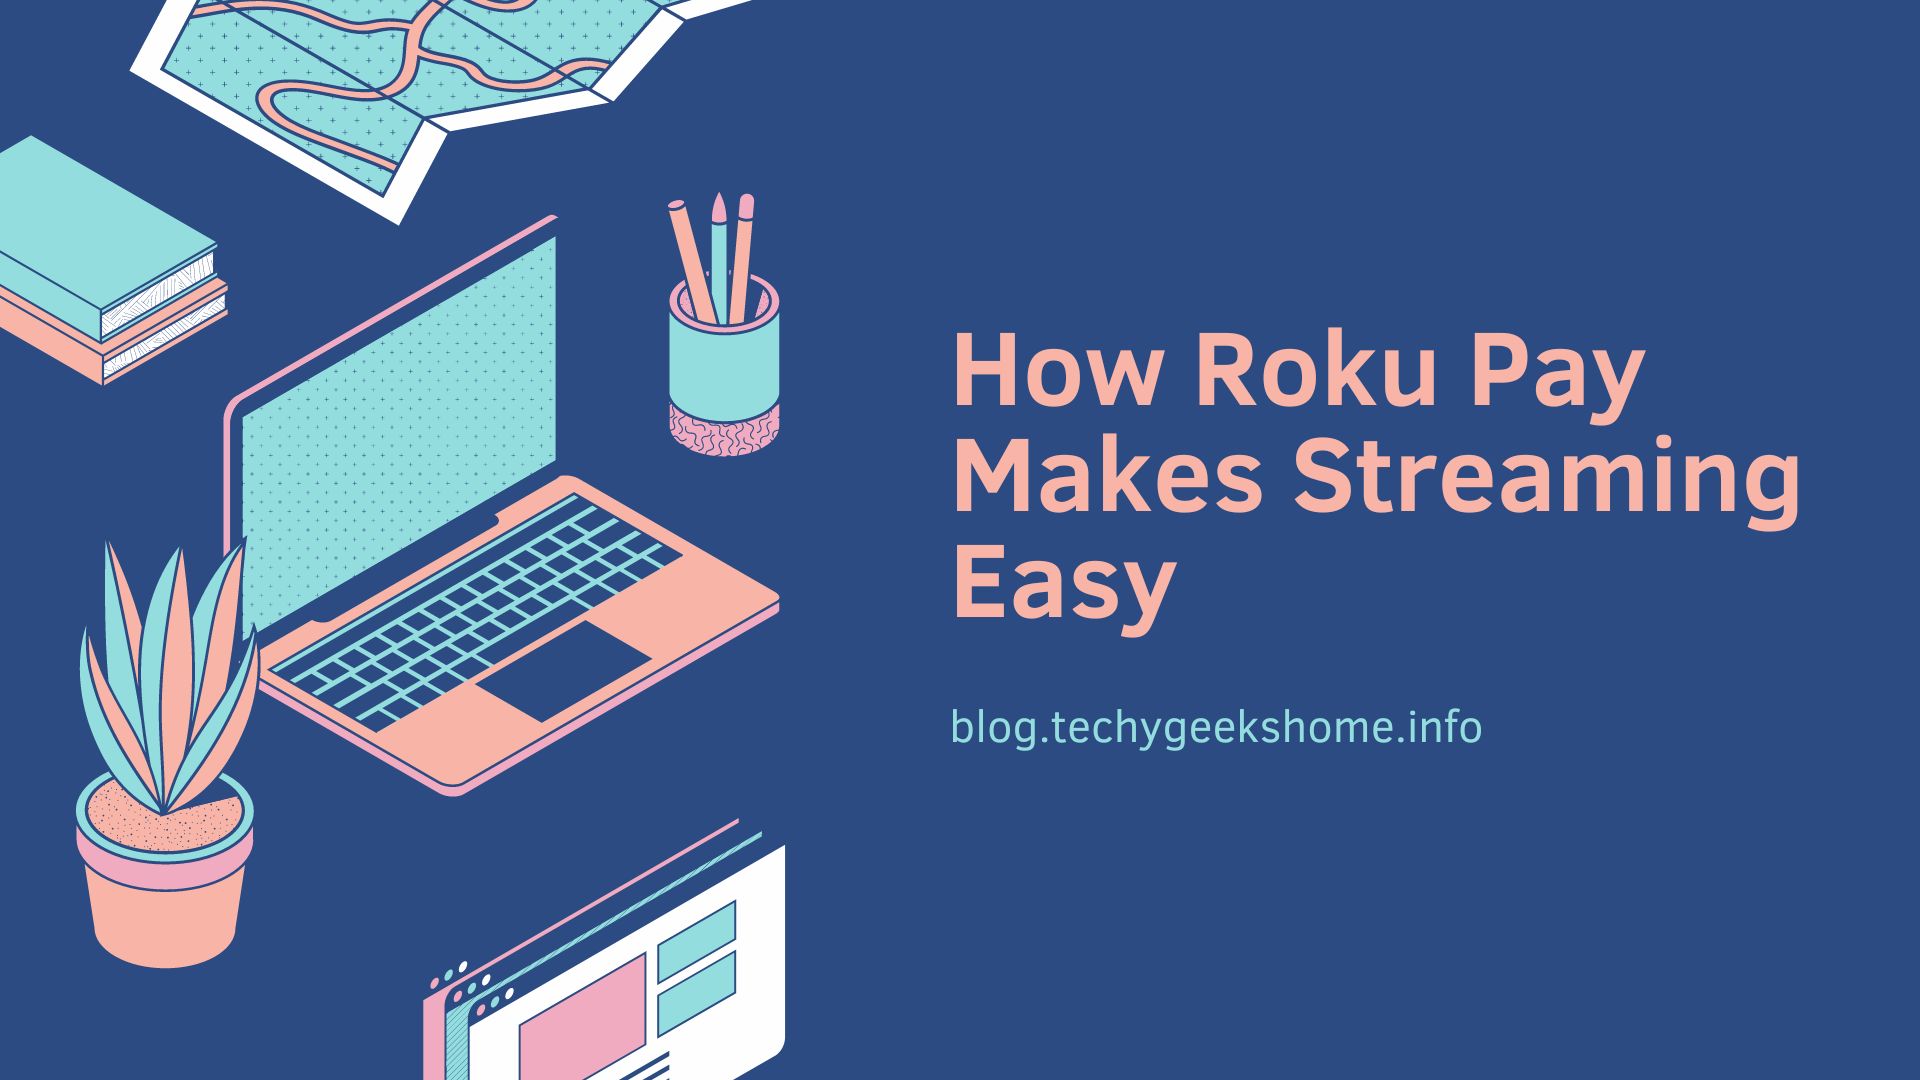 How Roku Pay Makes Streaming Easy